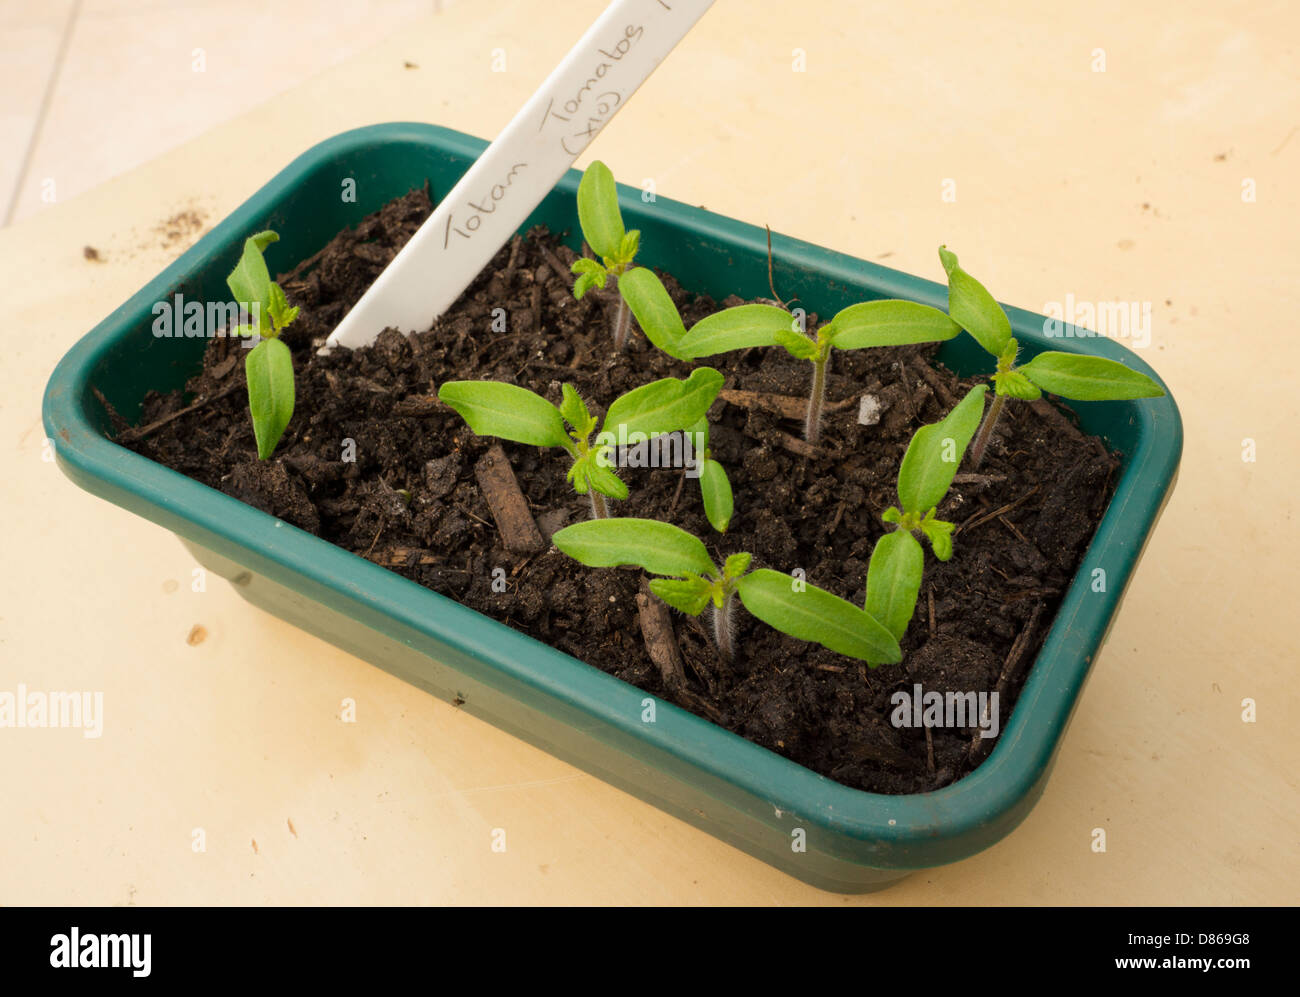 Growing your own food, F1 Totem Tomato seedlings. Stock Photo